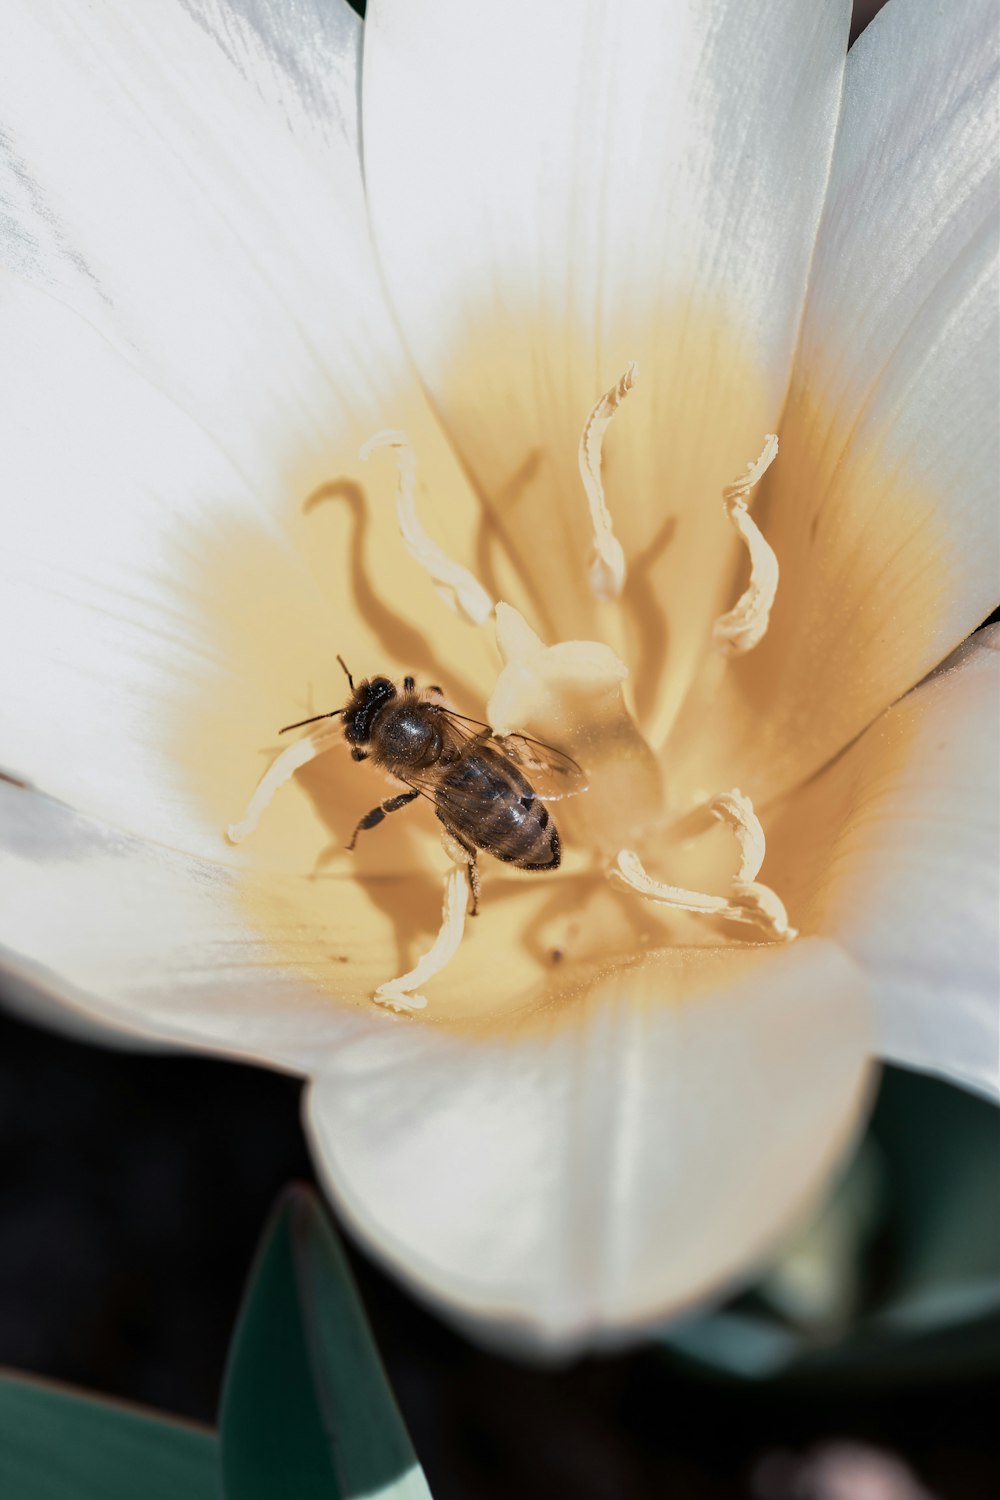 black and brown bee on white flower